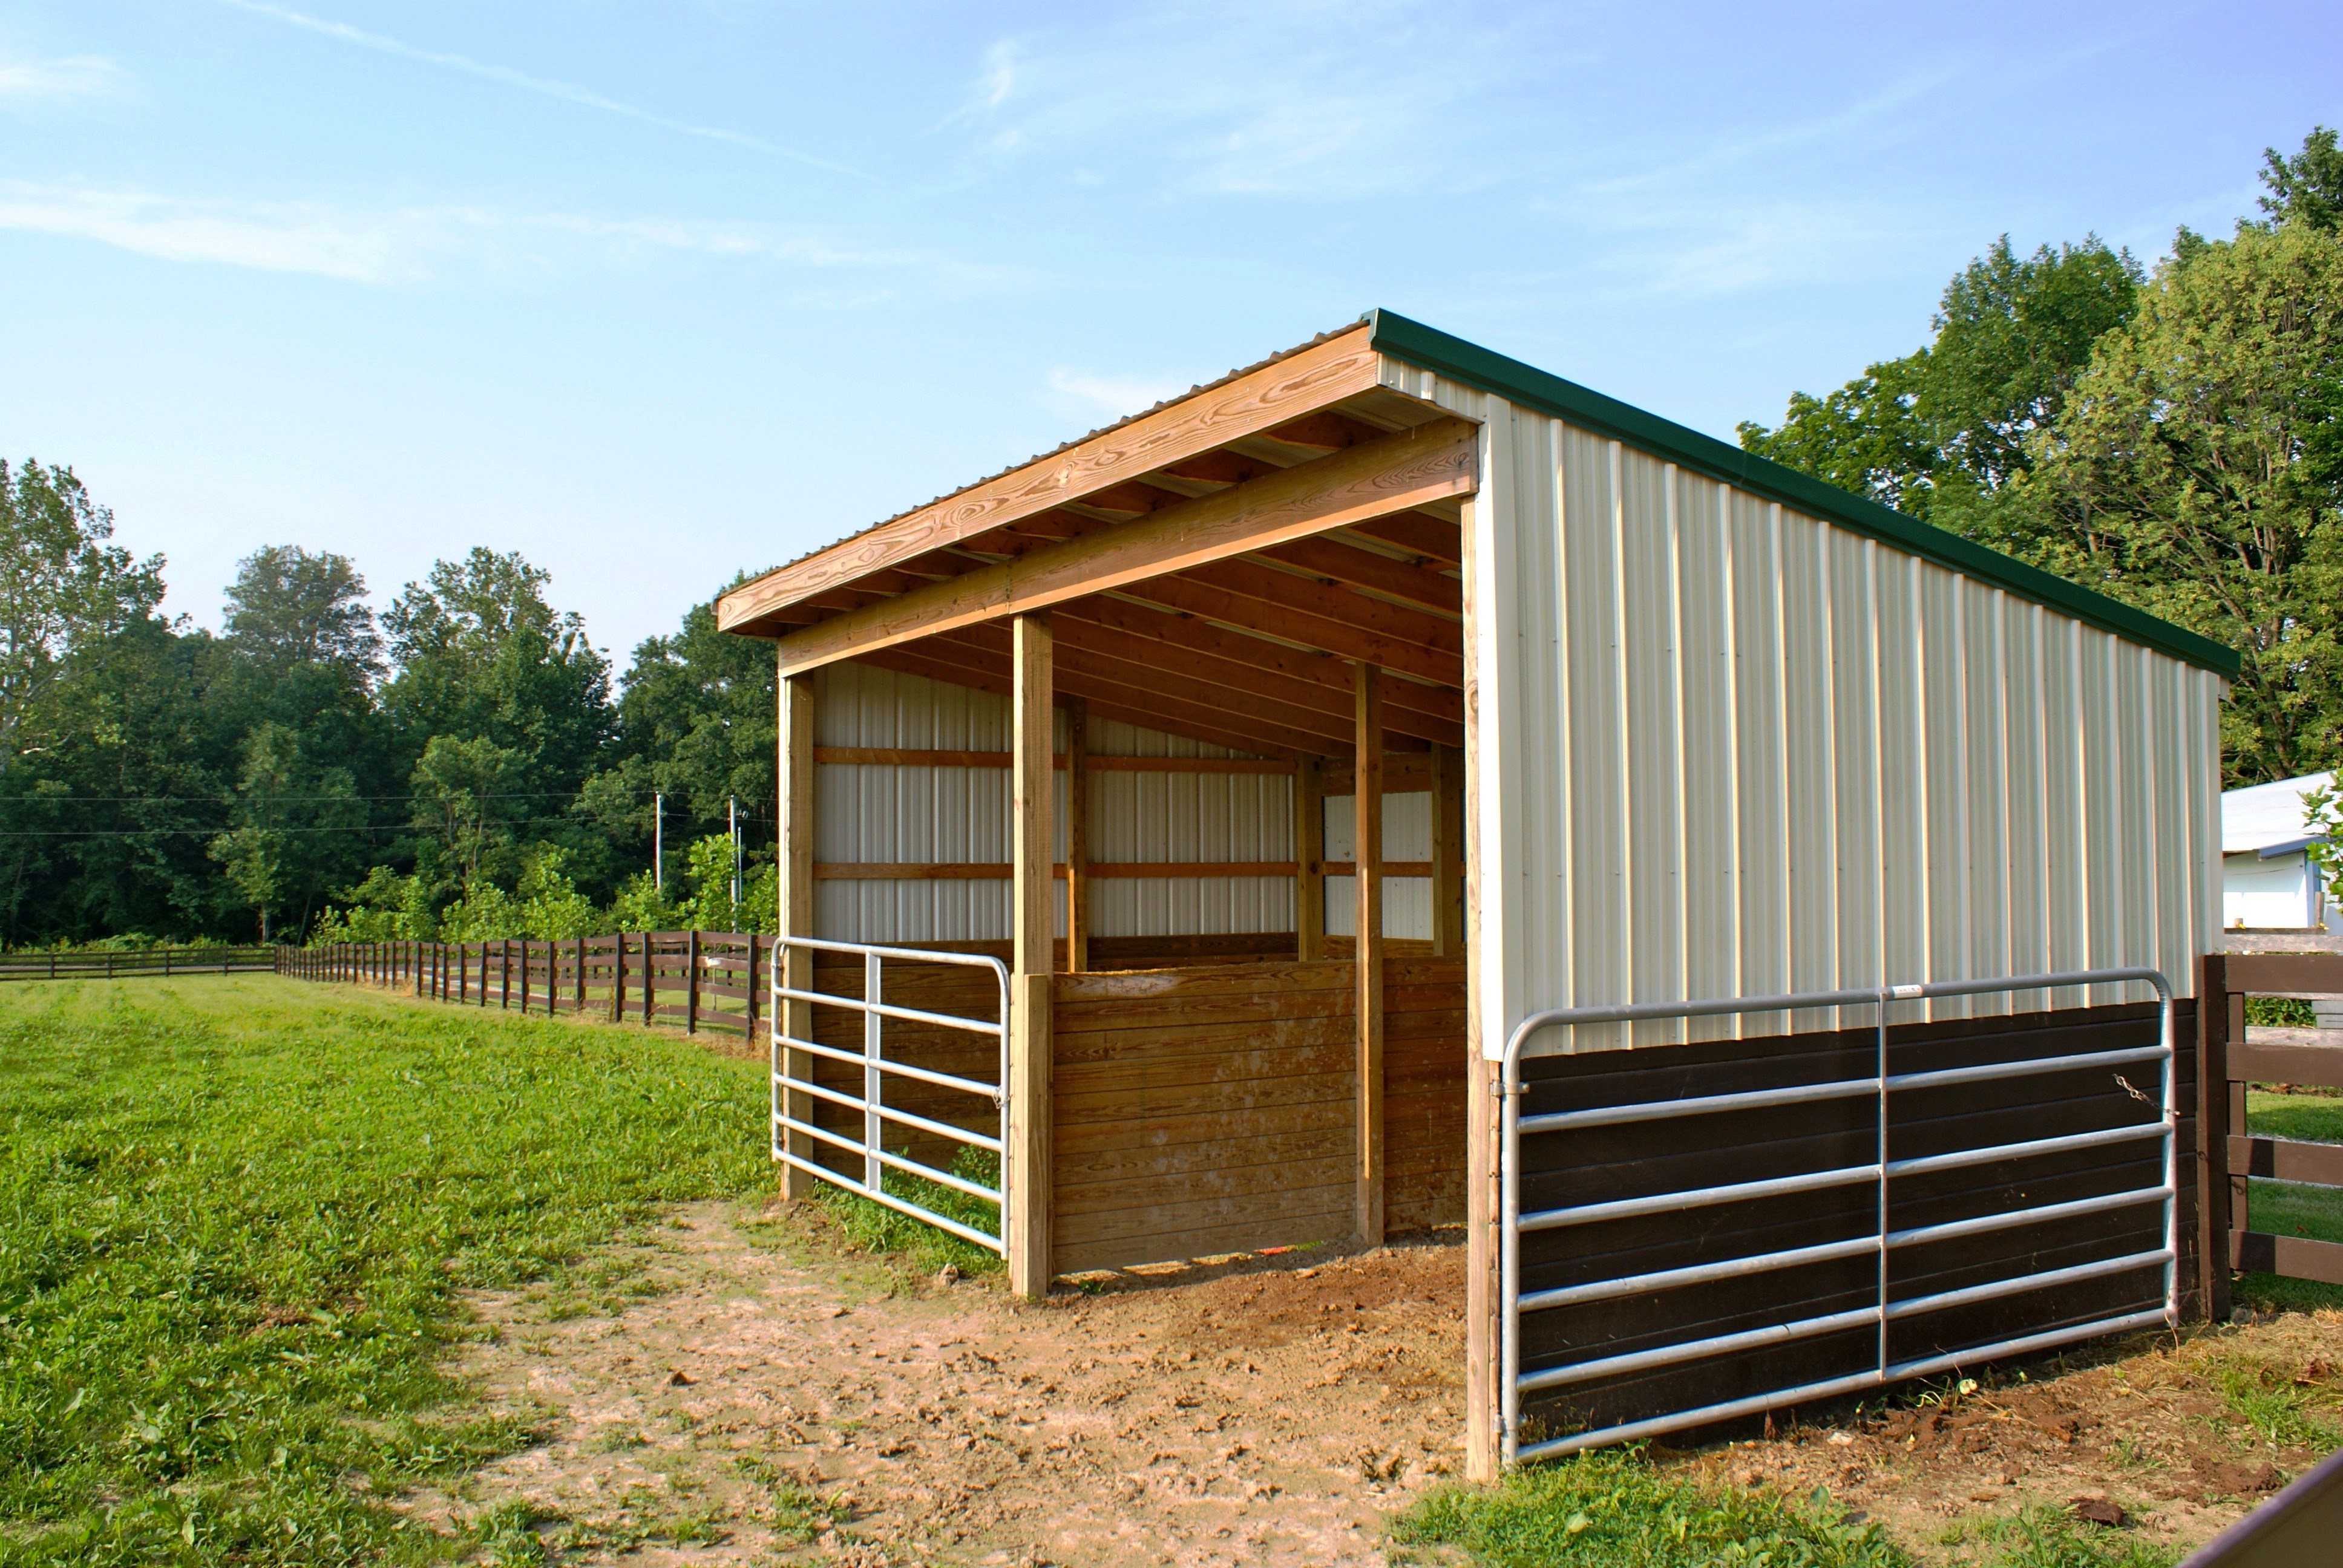 Horse Shelters: Stalls vs. Run-In Sheds - Welcome to Horse 